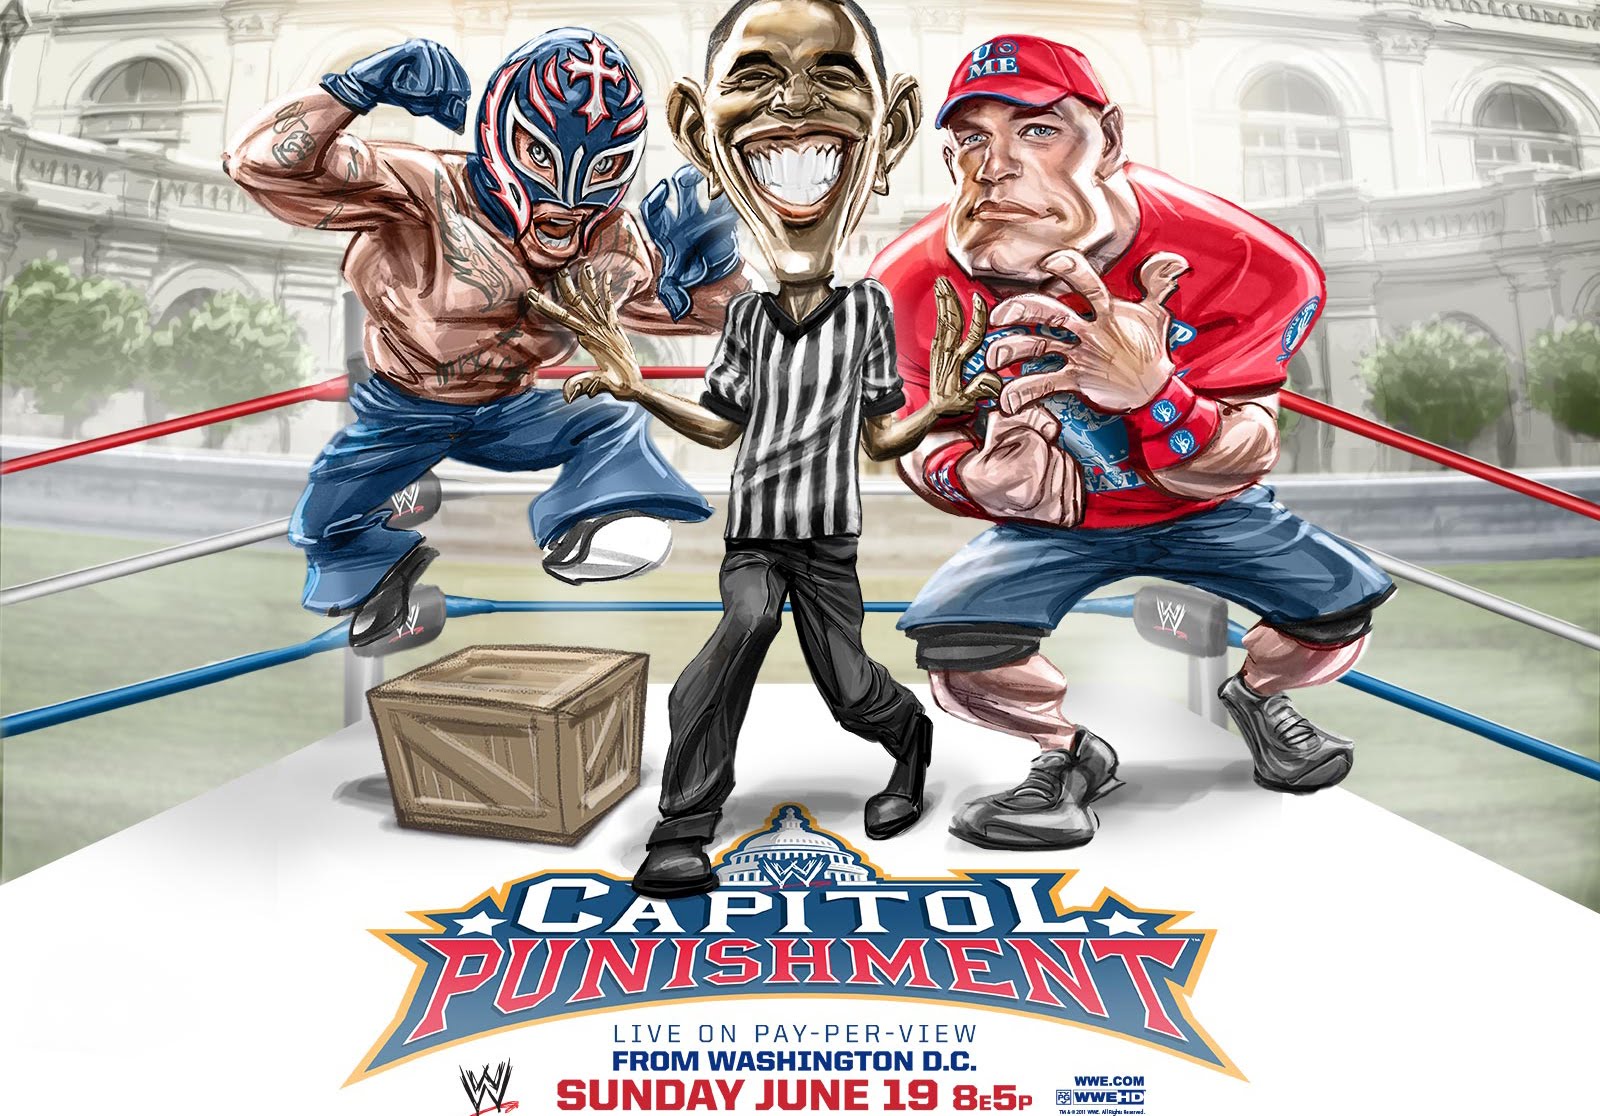 The Daily Zombies Wwe Capitol Punishment Pre